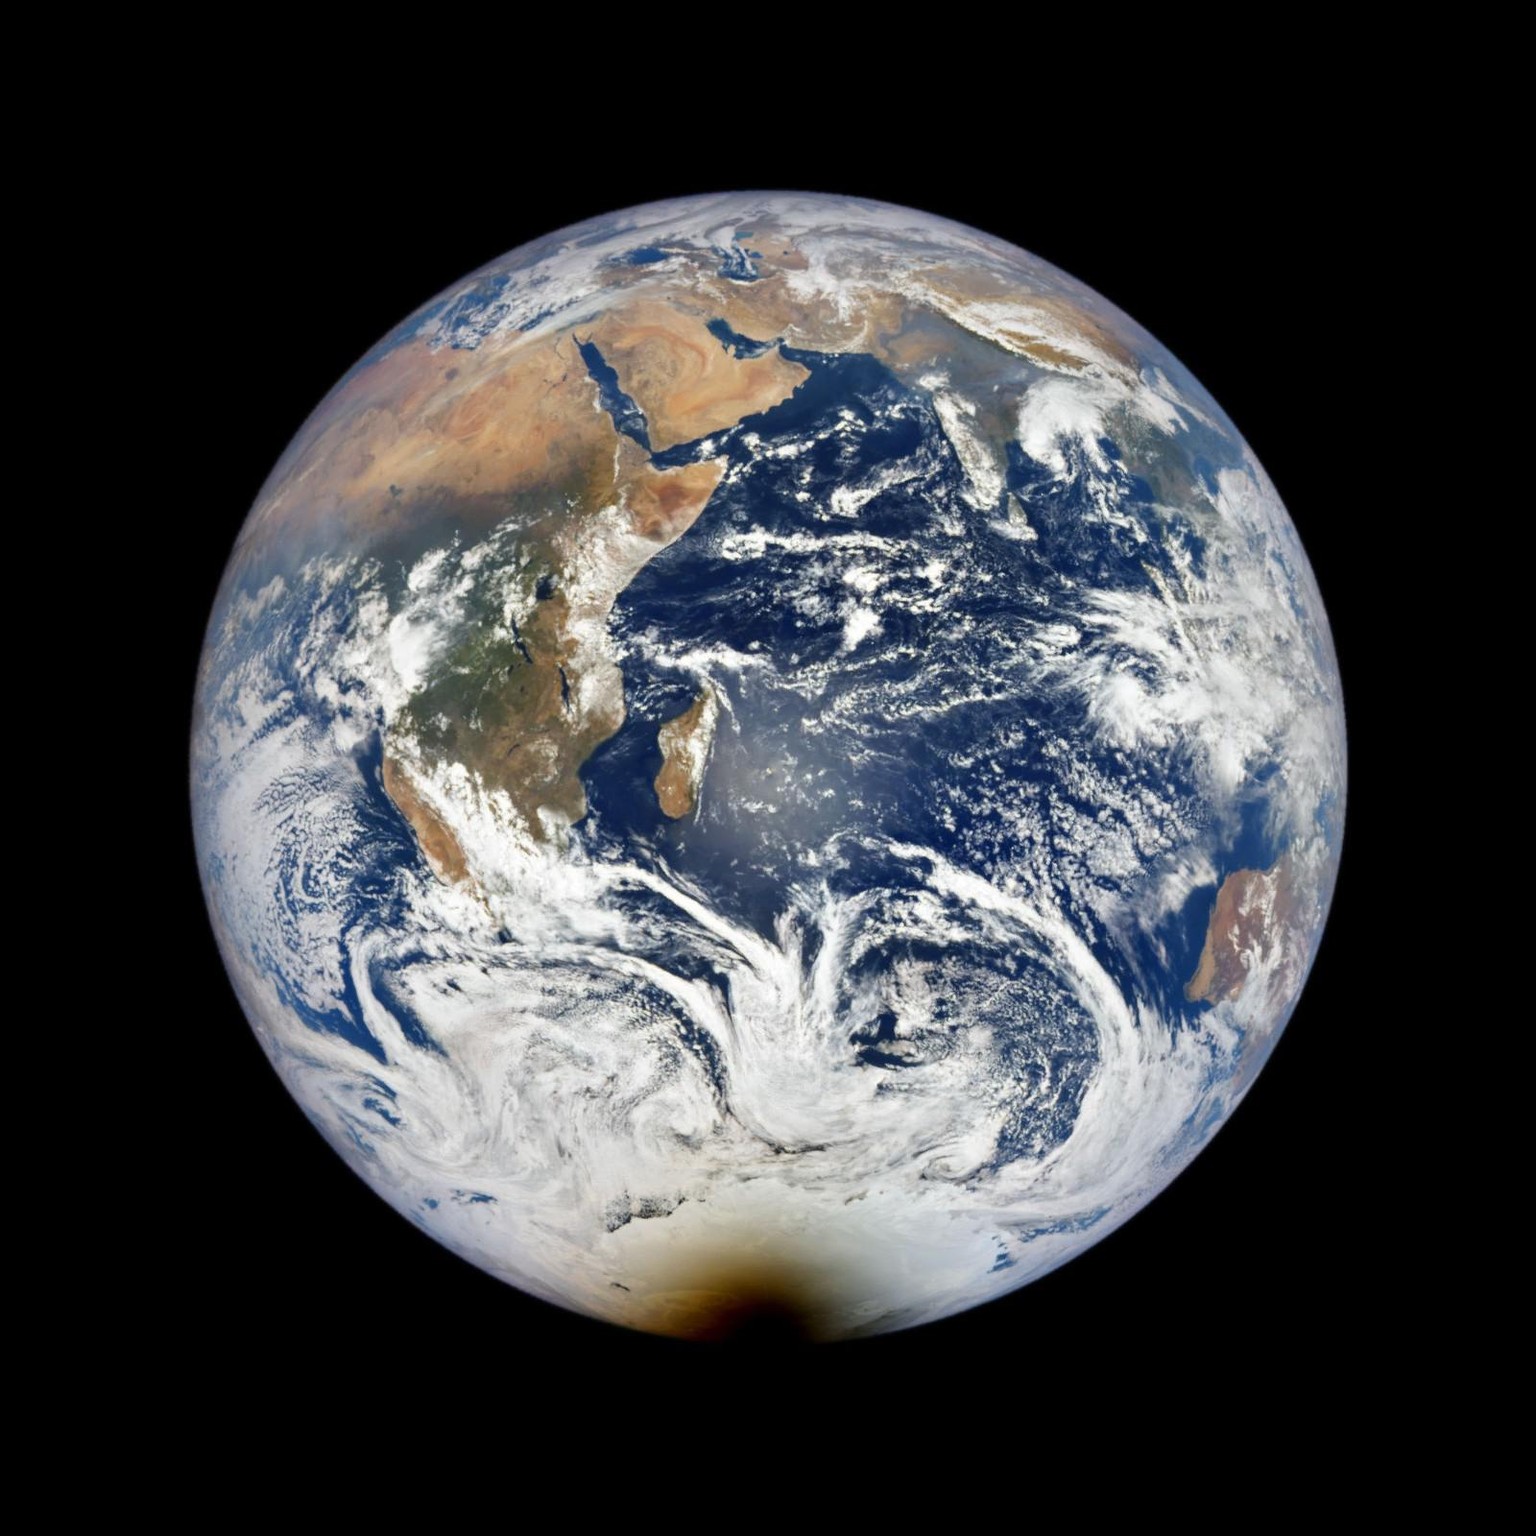 This image was acquired during the eclipse by the Earth Polychromatic Imaging Camera (EPIC) aboard the Deep Space Climate Observatory (DSCVR). 
https://earthobservatory.nasa.gov/images/149174/antarcti ...